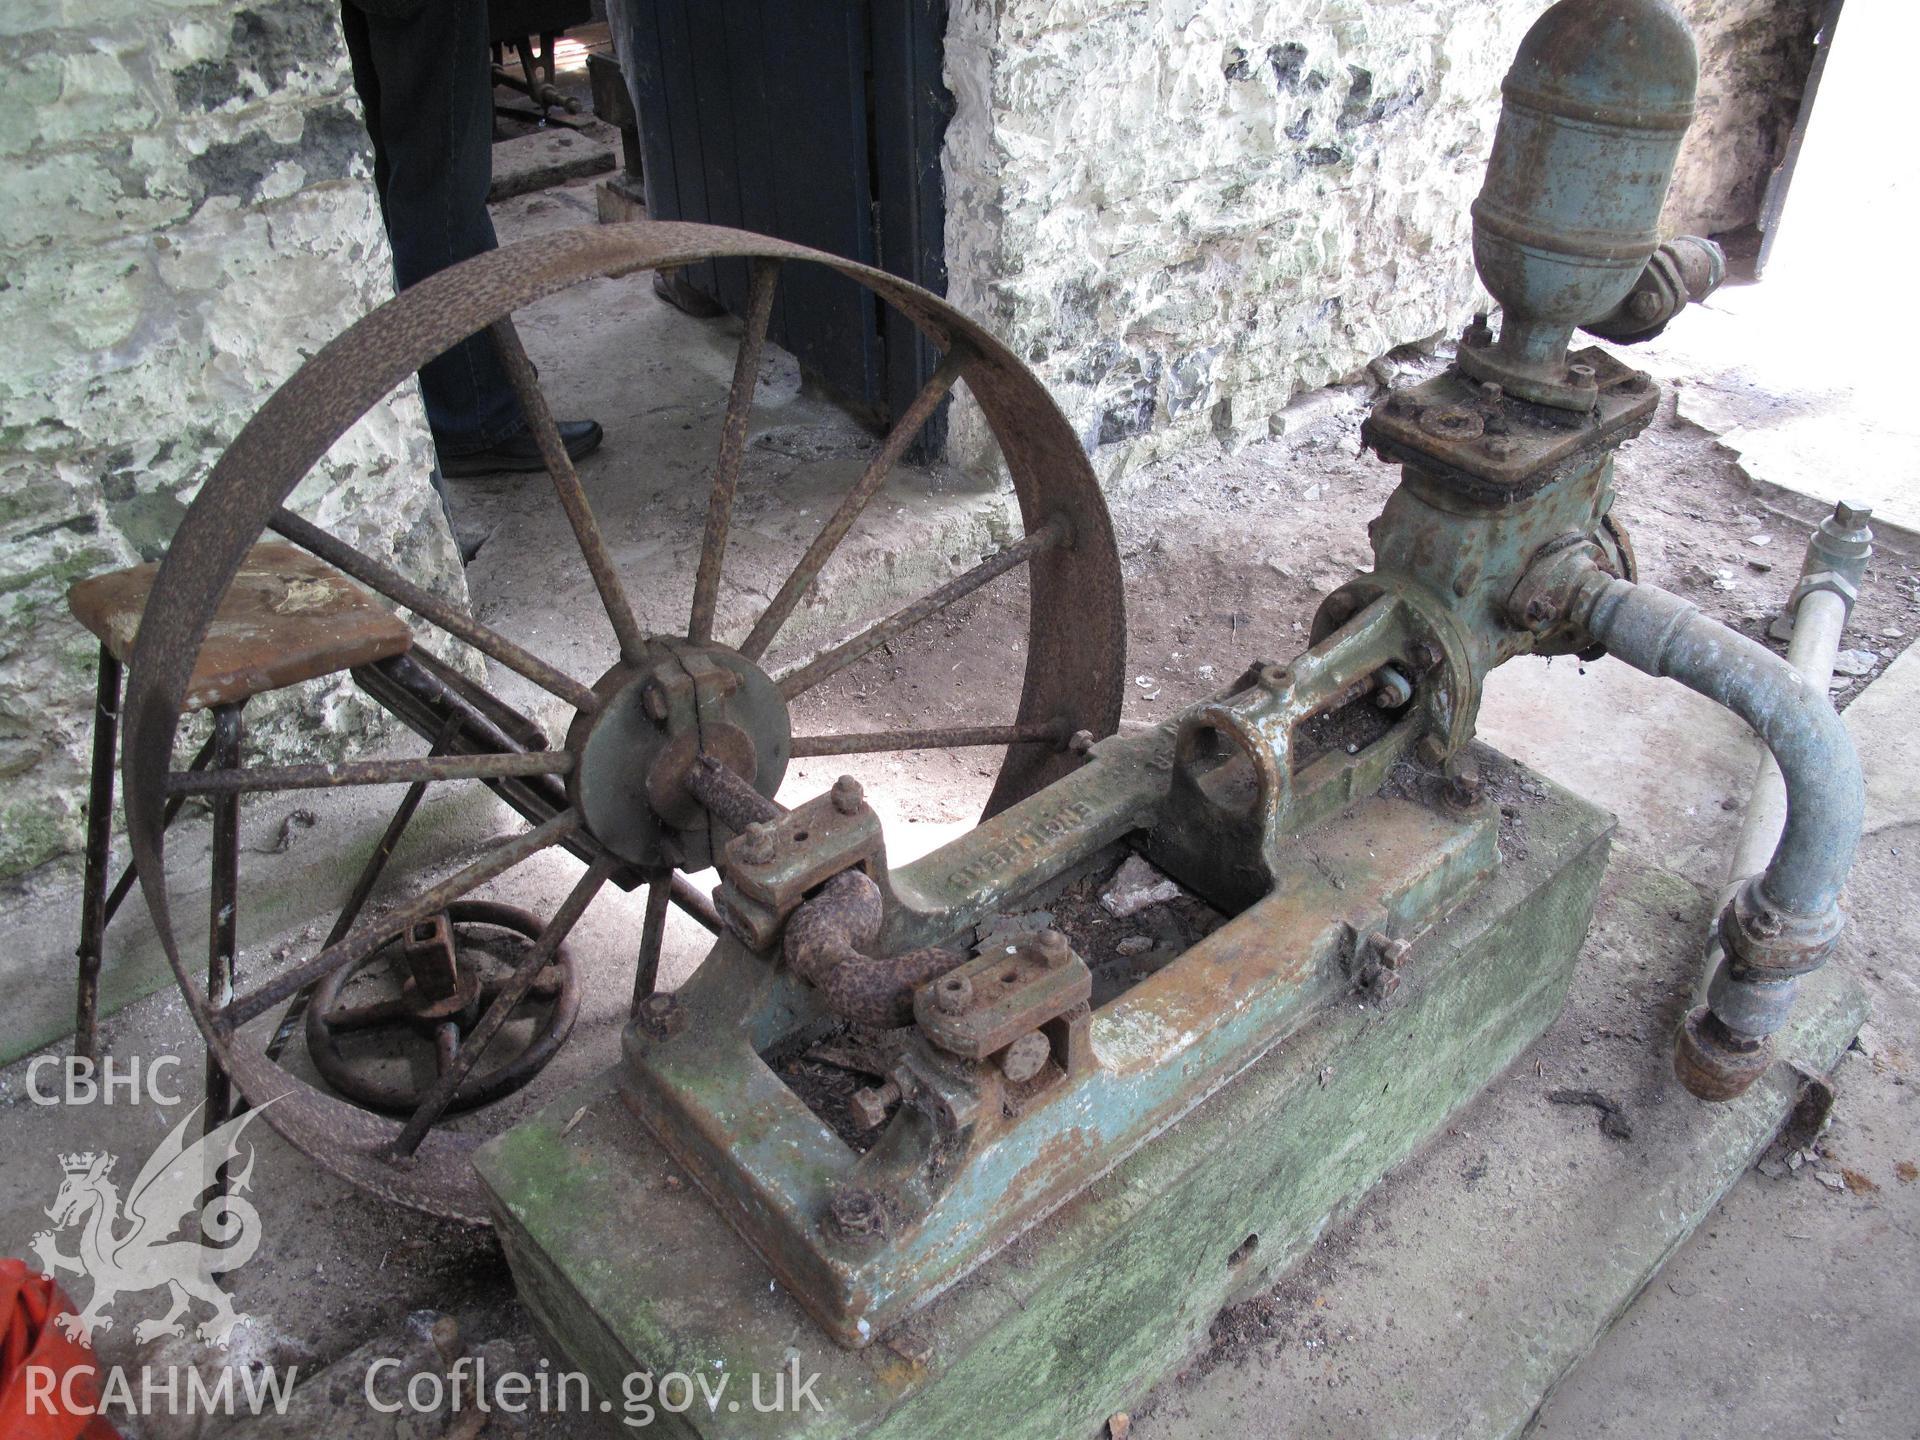 Old pump at Dynefwr Park Pumping House, Llandeilo, taken by Brian Malaws on 24 April 2010.